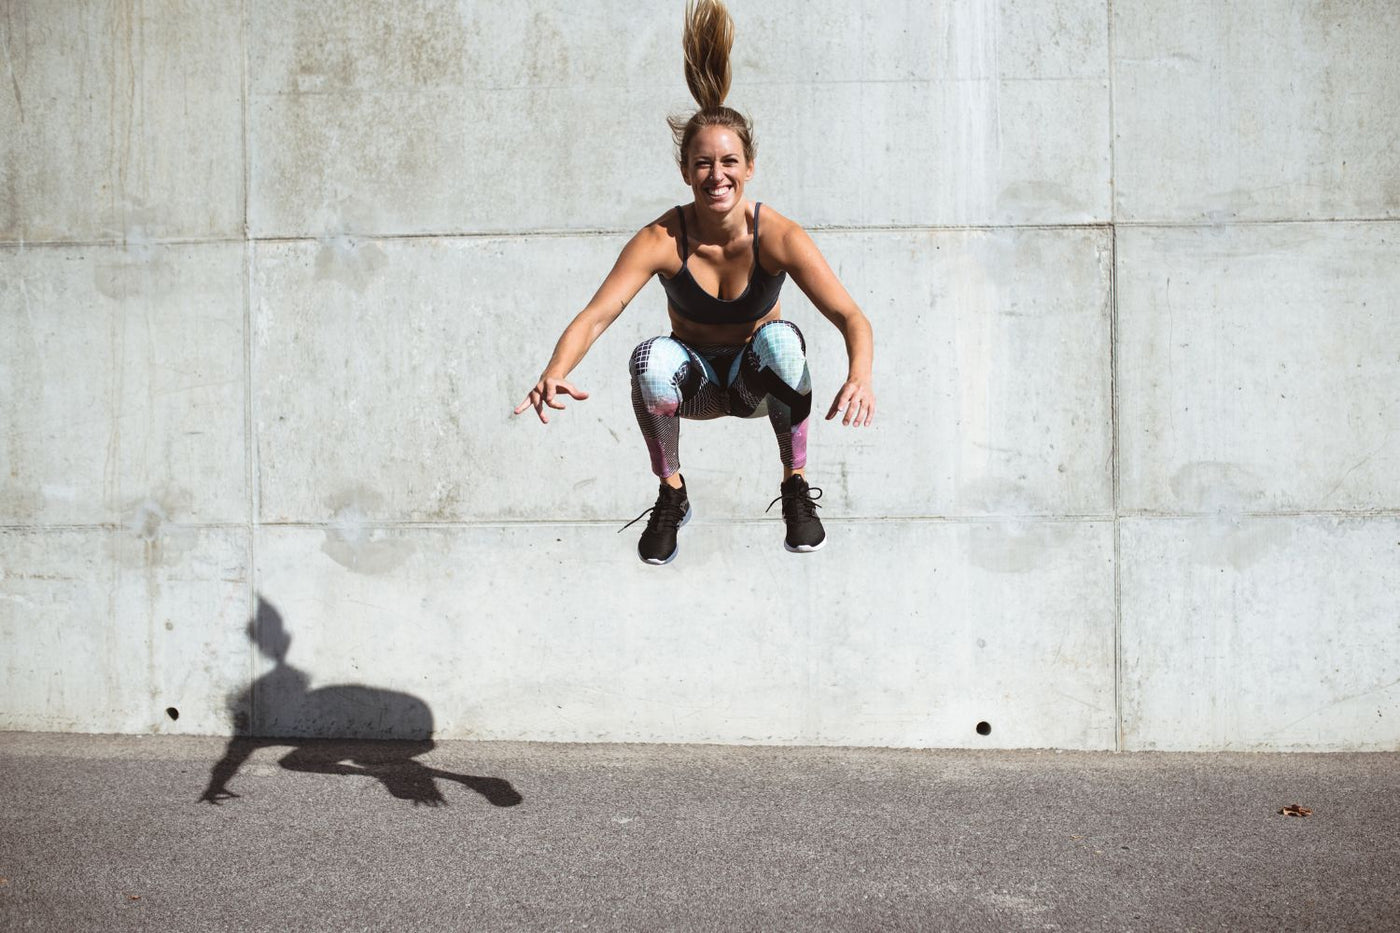 Woman doing jump squats in front of a stone wall. She is high off the ground and grinning.